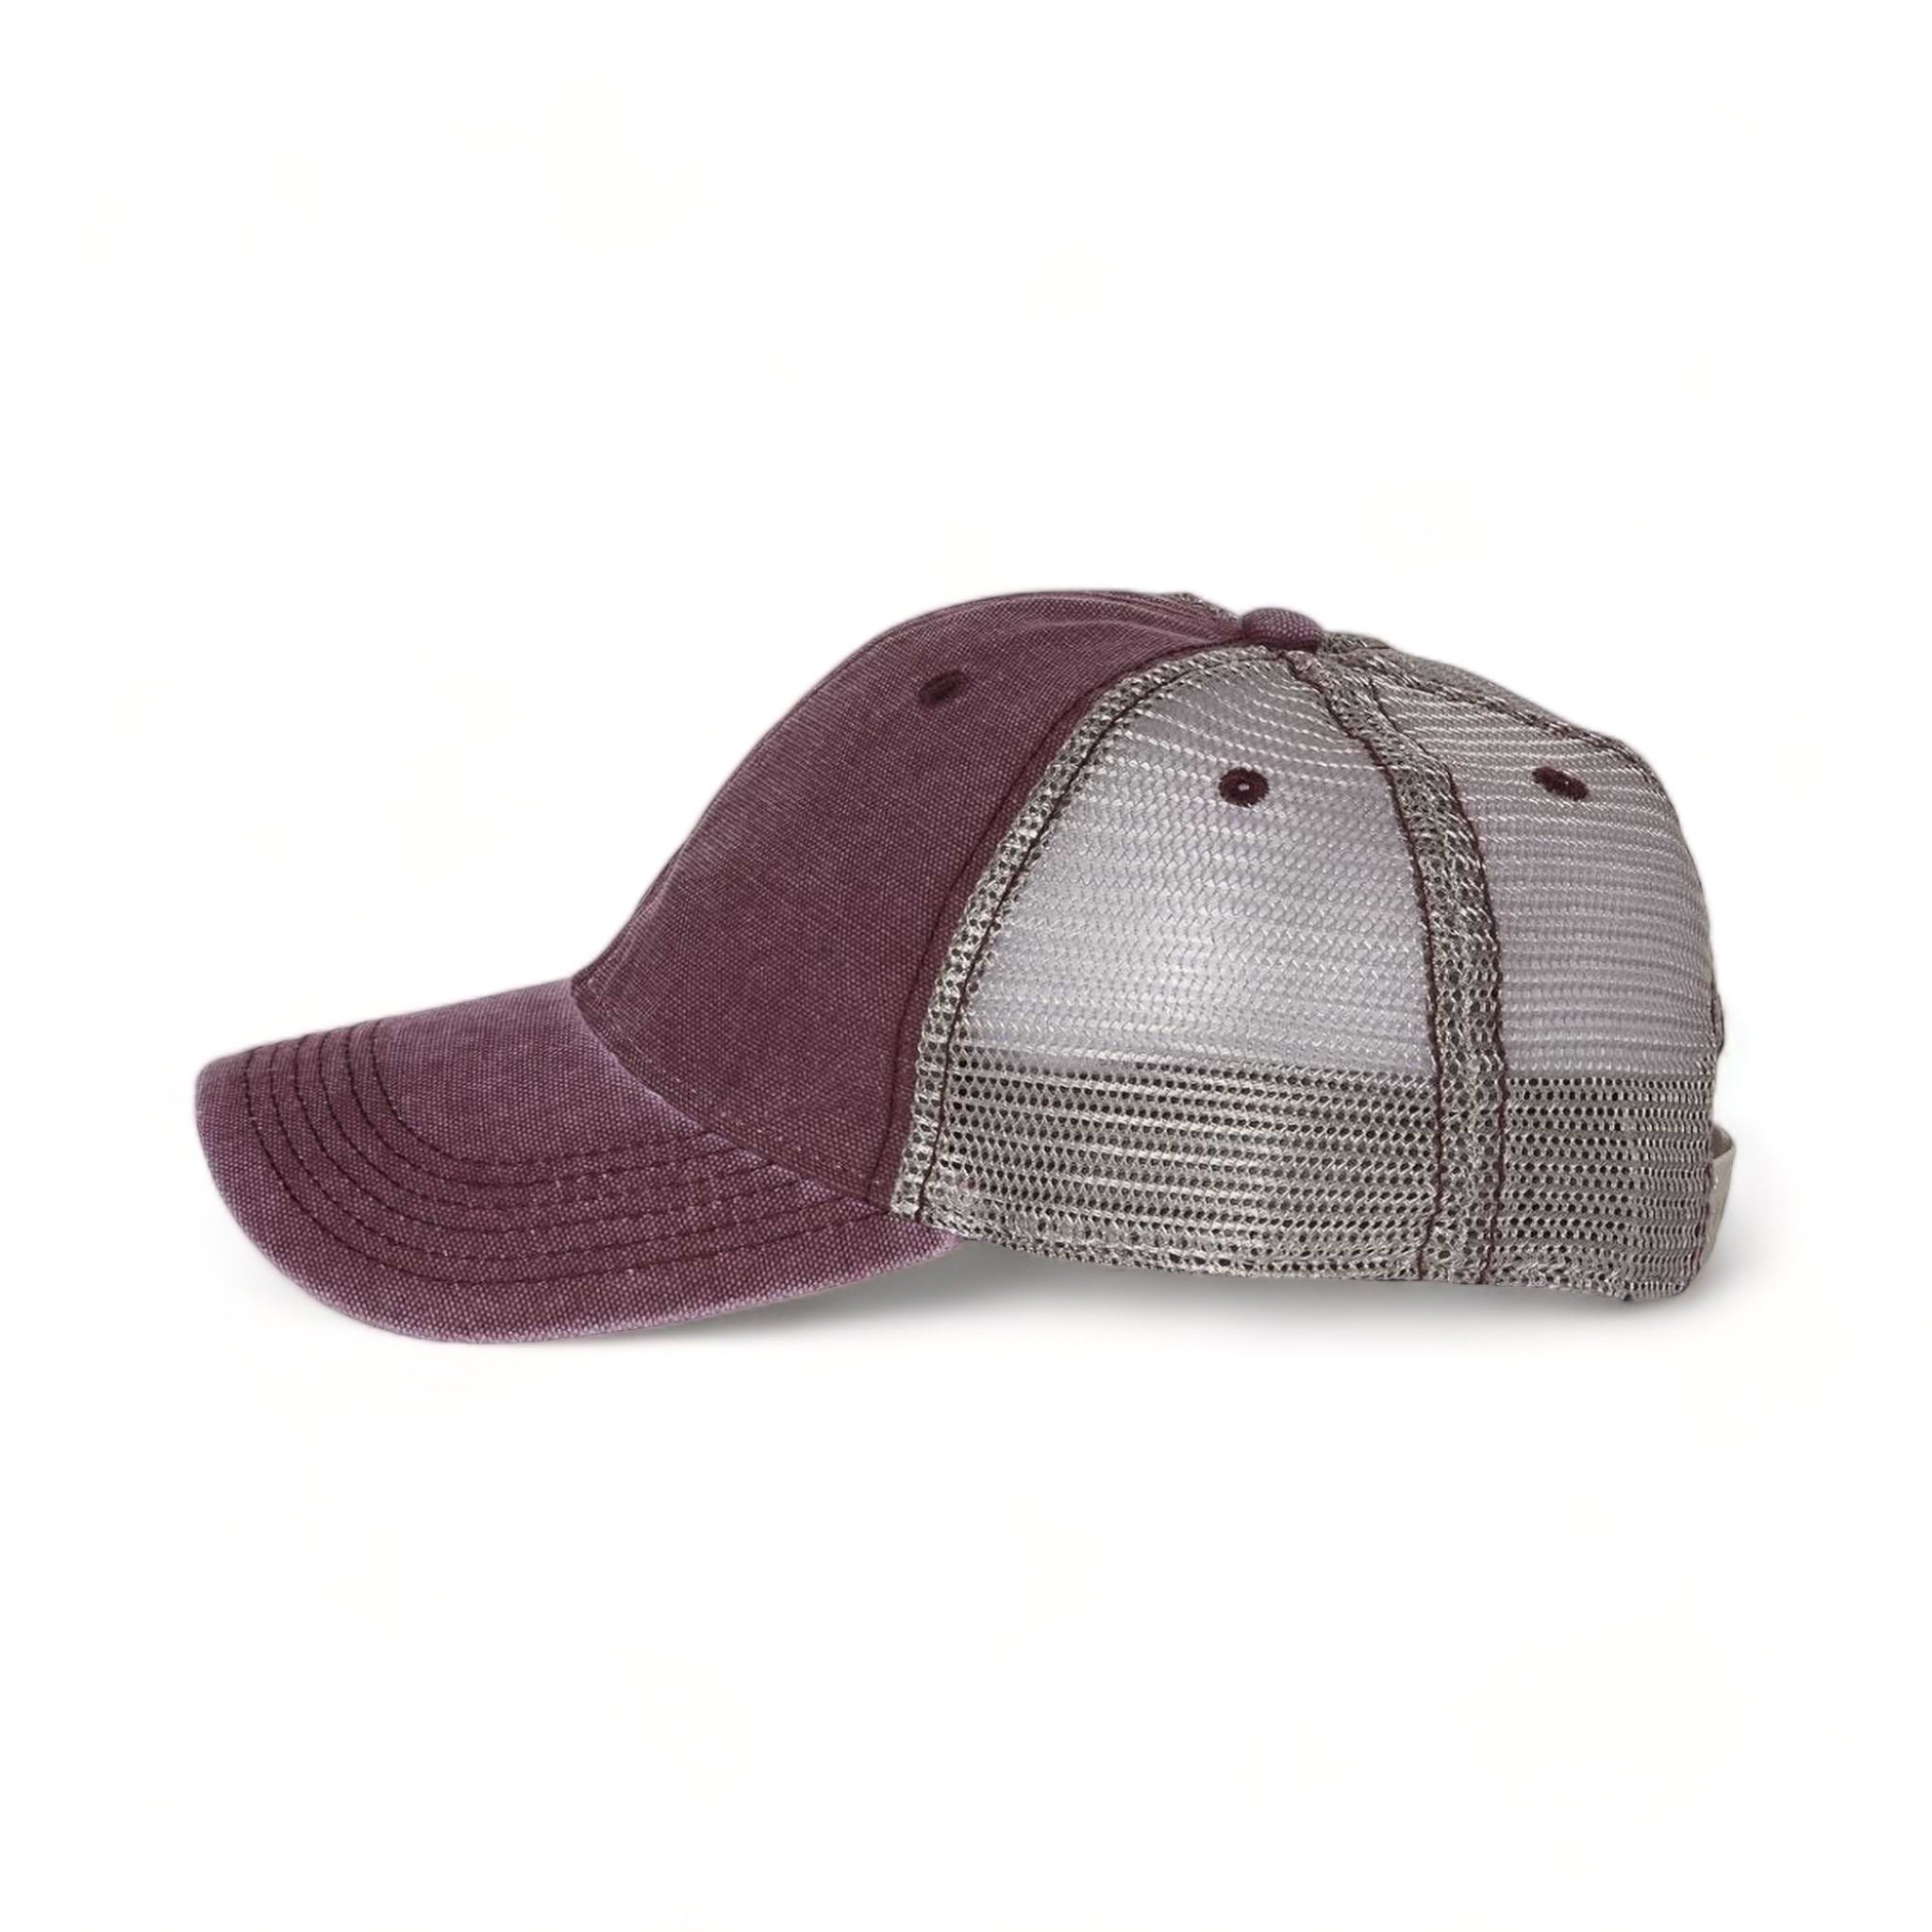 Side view of LEGACY DTA custom hat in burgundy and grey